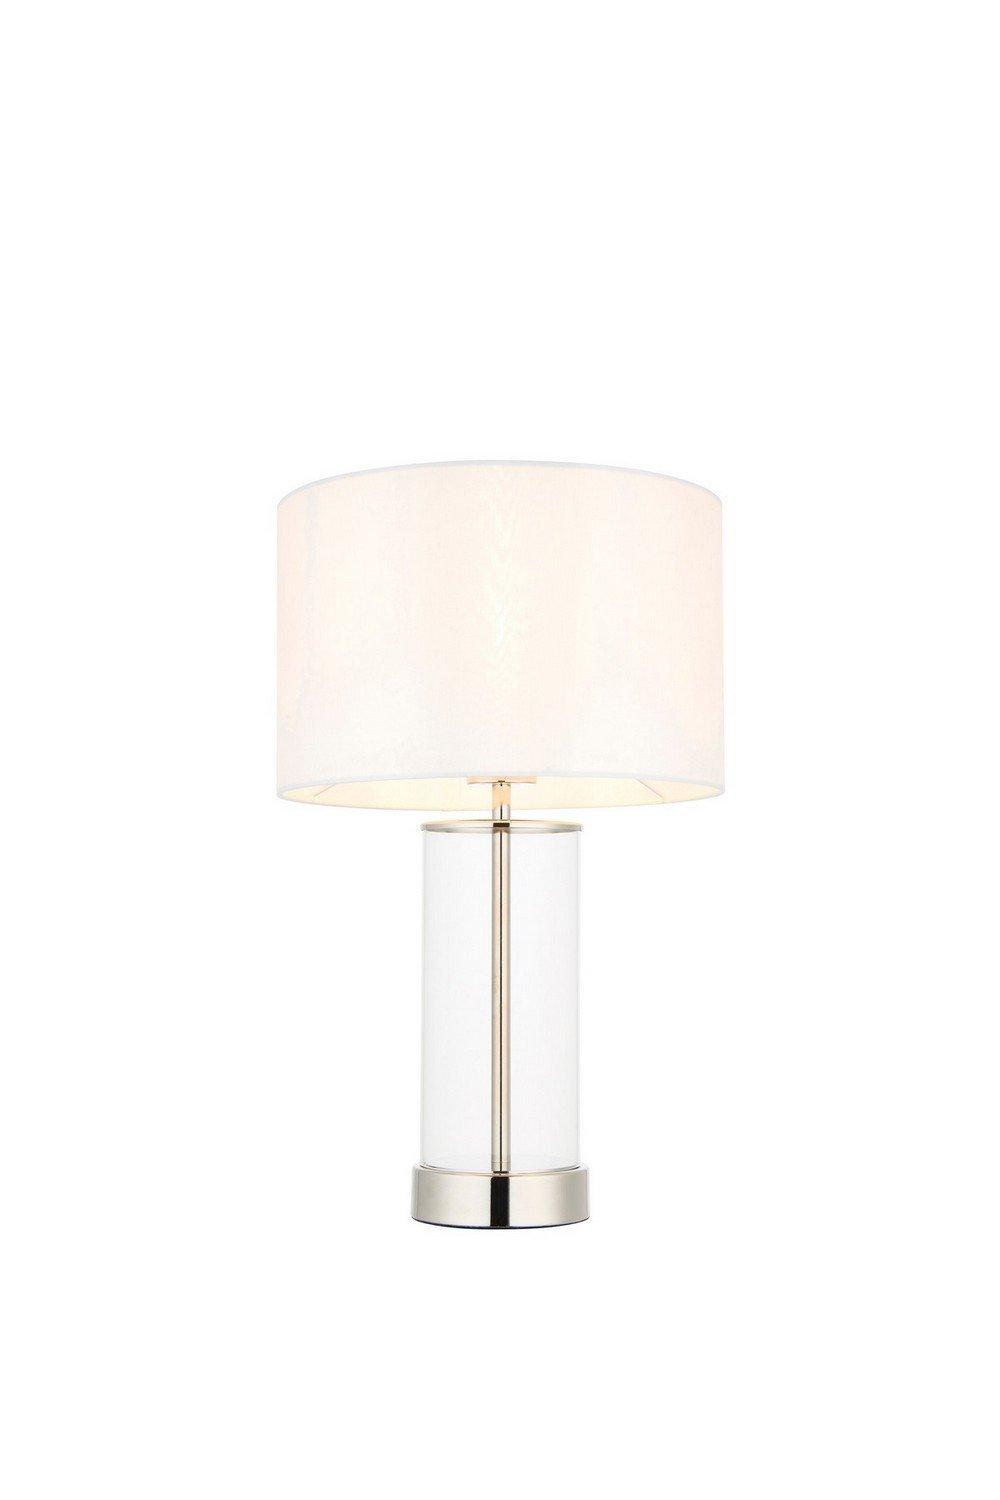 Lessina Base & Shade Table Lamp Bright Nickel Plate Glass Vintage White Fabric